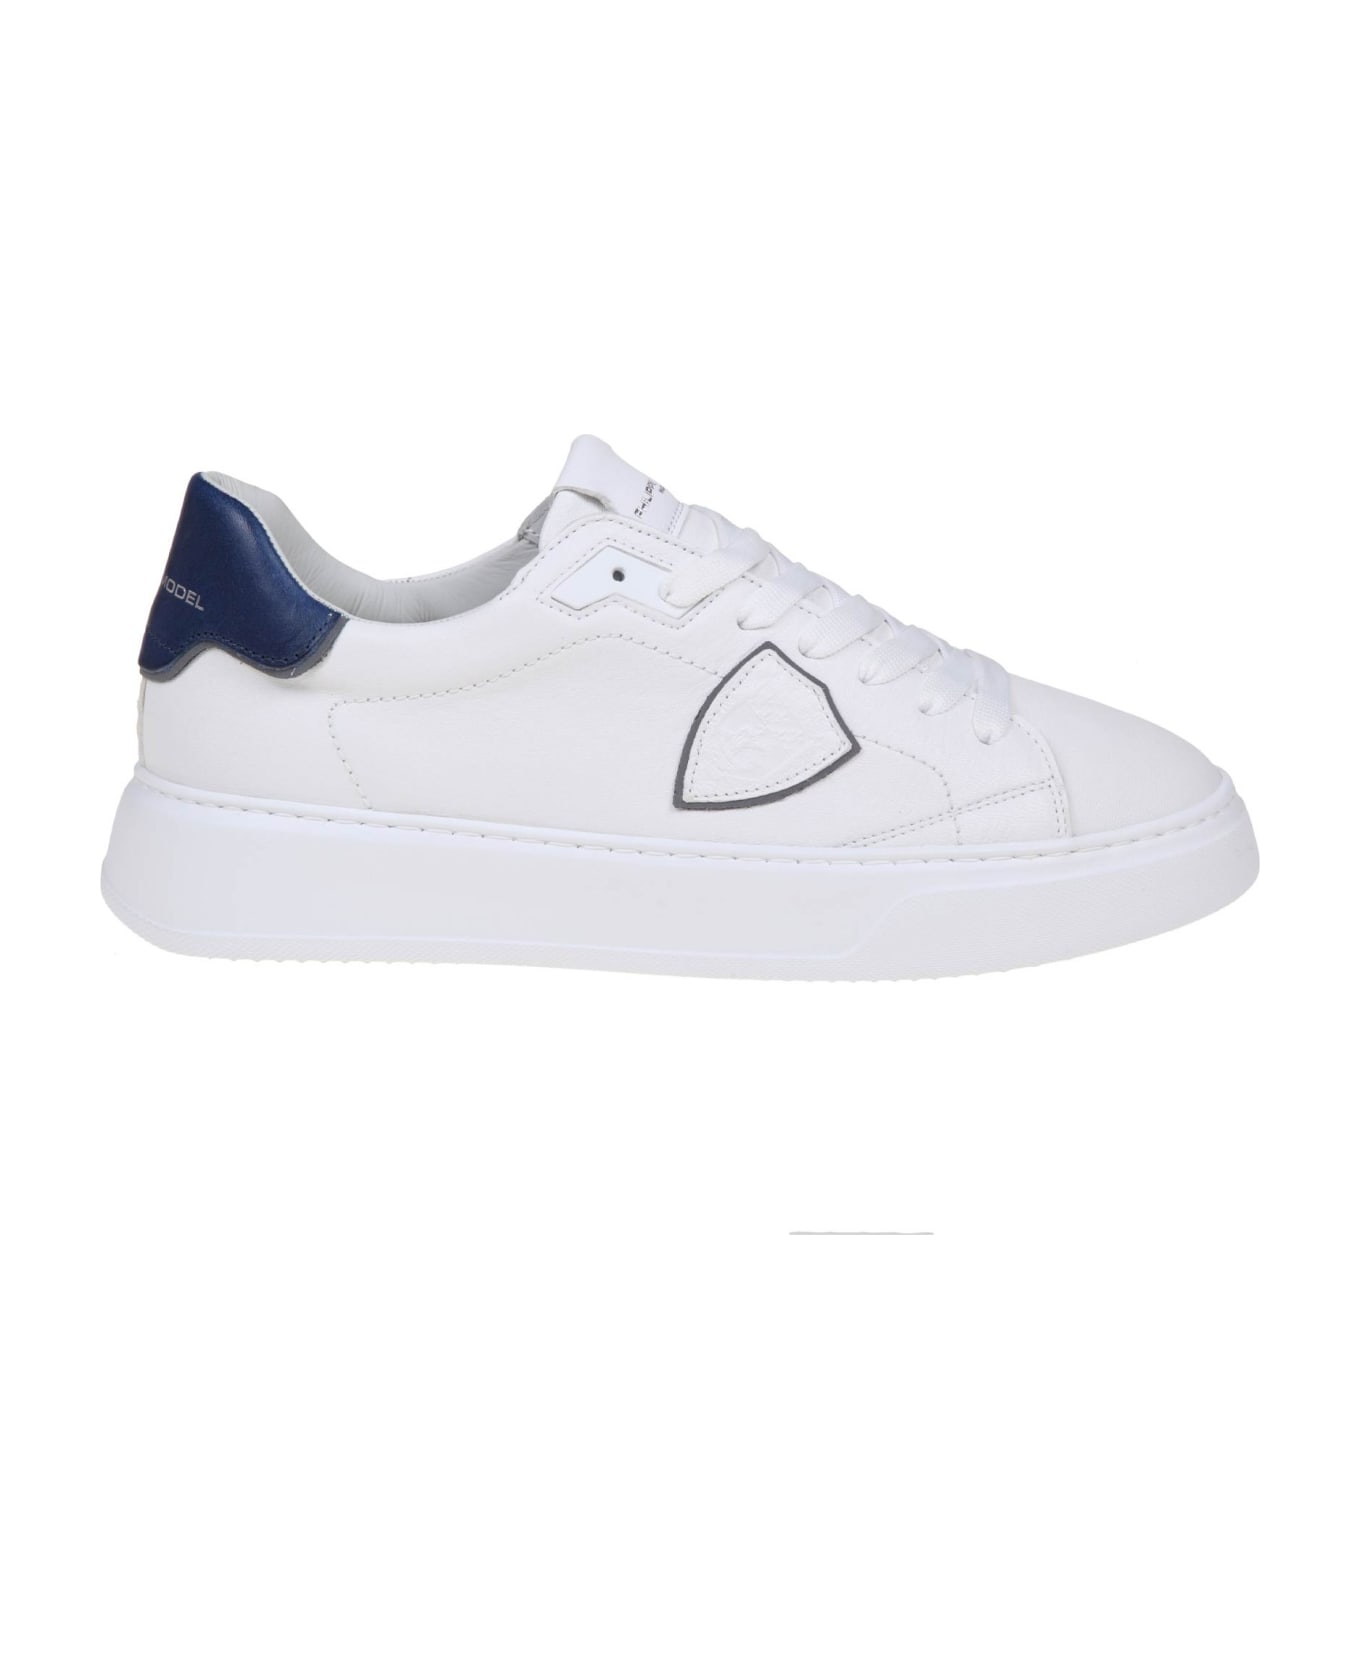 Philippe Model Temple Sneakers In White/blue Leather Philippe Model - WHITE スニーカー